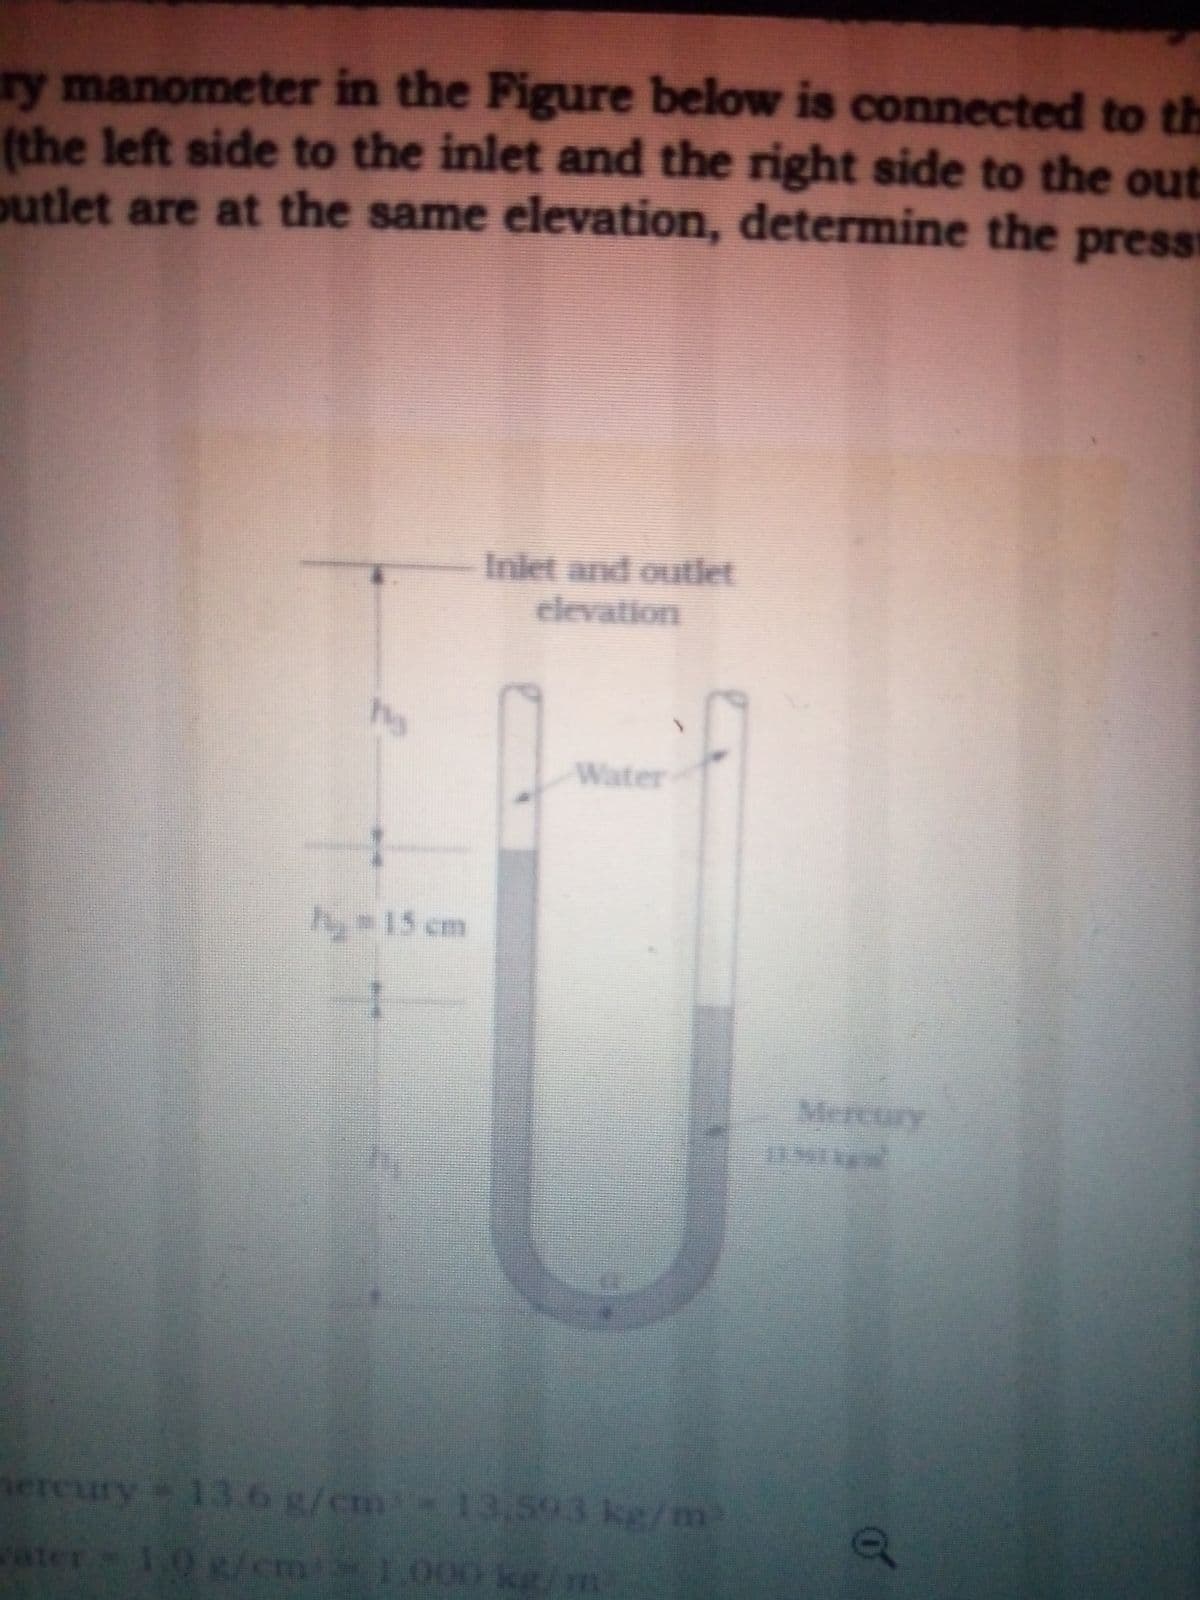 ry manometer in the Figure below is connected to th
(the left side to the inlet and the right side to the out
outlet are at the same elevation, determine the press
Inlet and outlet
elevation
hy
Water
hy-15 cm
Mercury
nercury 13.6g/cm 13,593 kg/n
ater 10 g/em 1.000 kg/m
/
